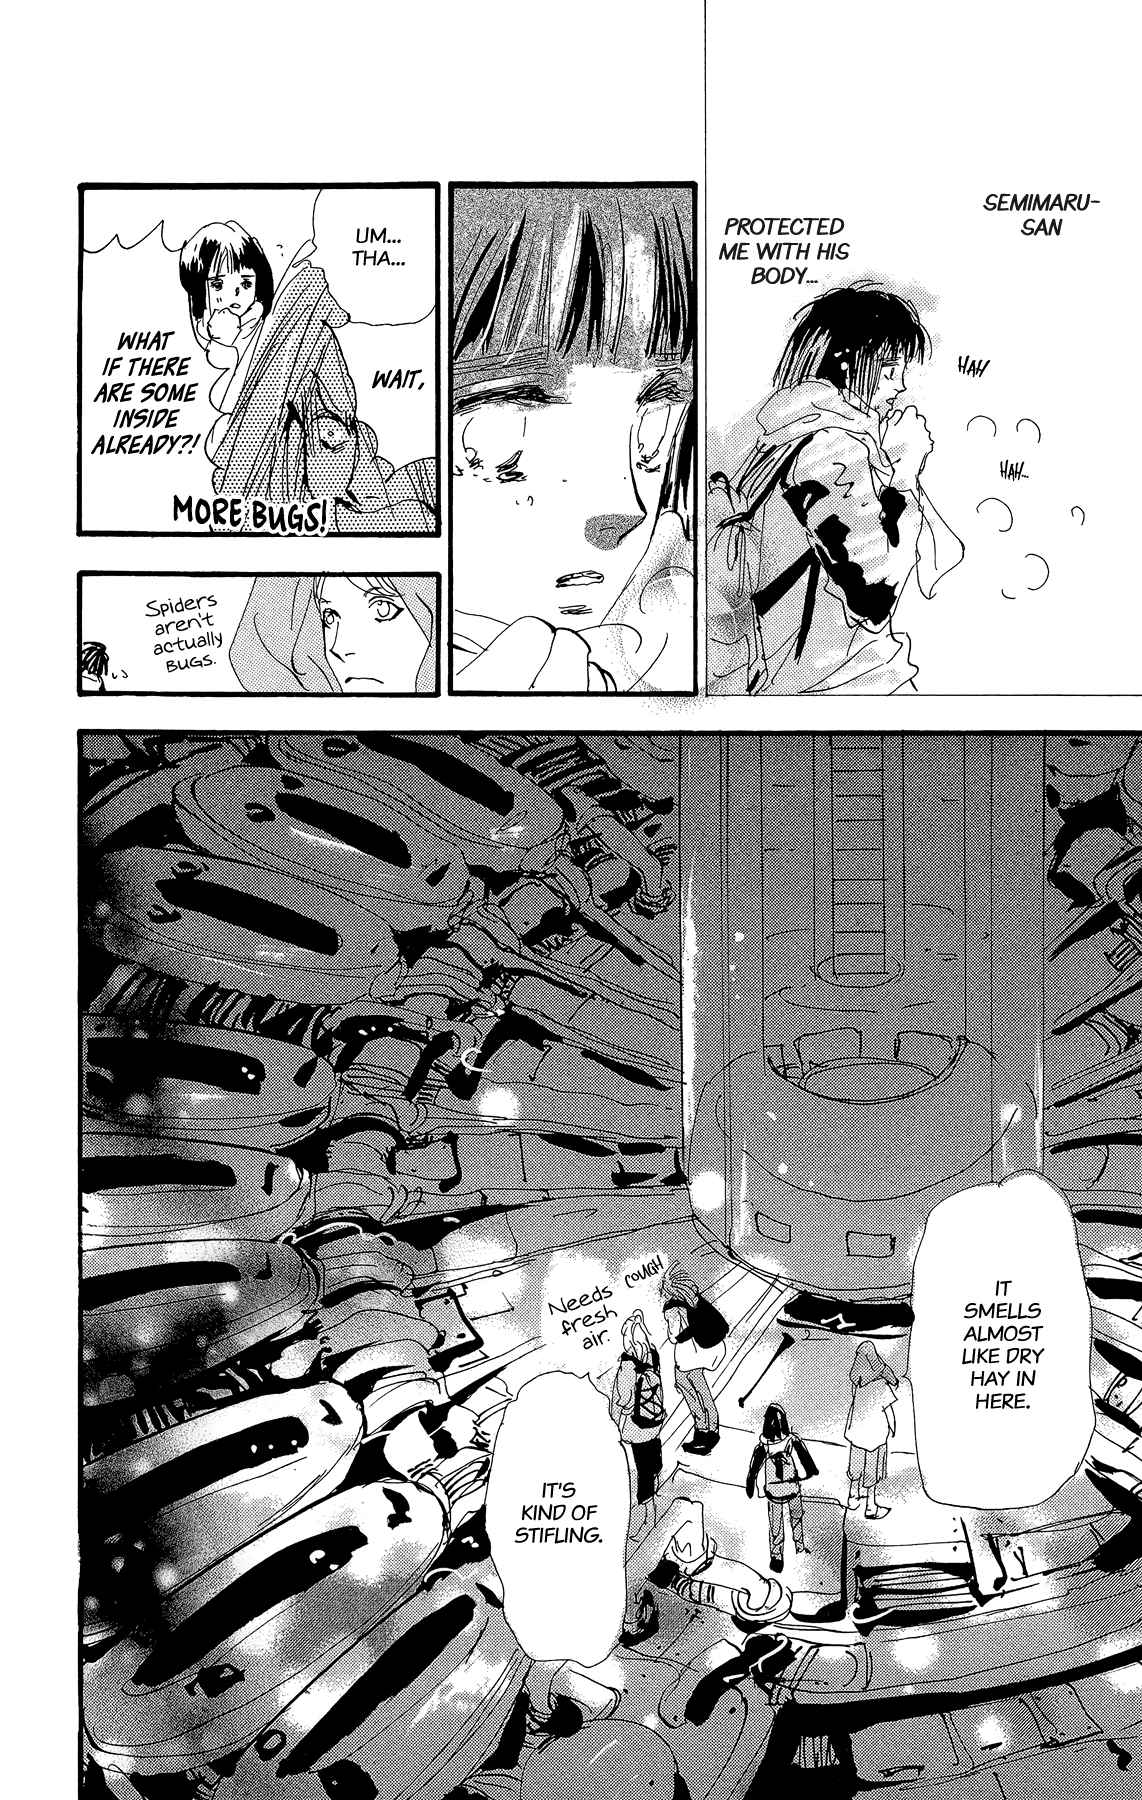 7 Seeds Vol. 33 Ch. 171 Sky Chapter 8 [The Ark]